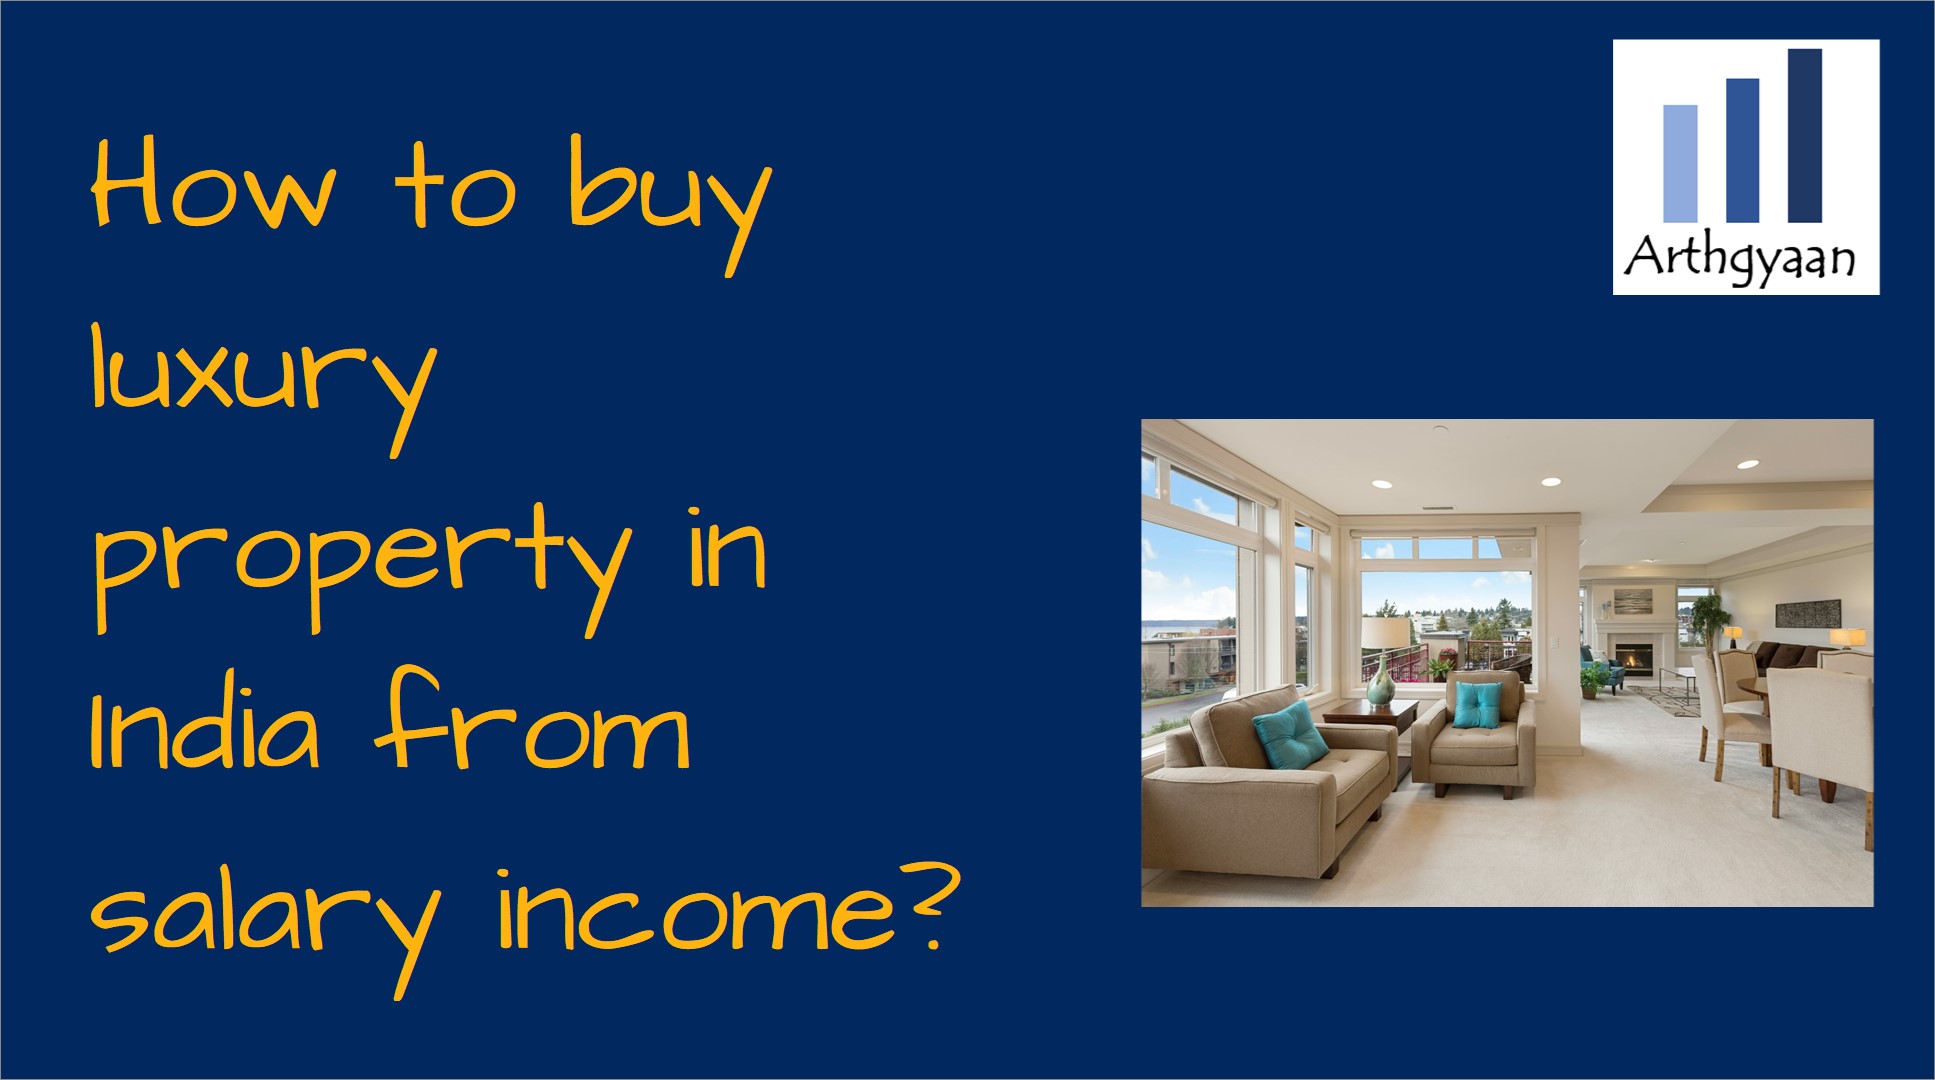 How to buy luxury property in India from salary income?